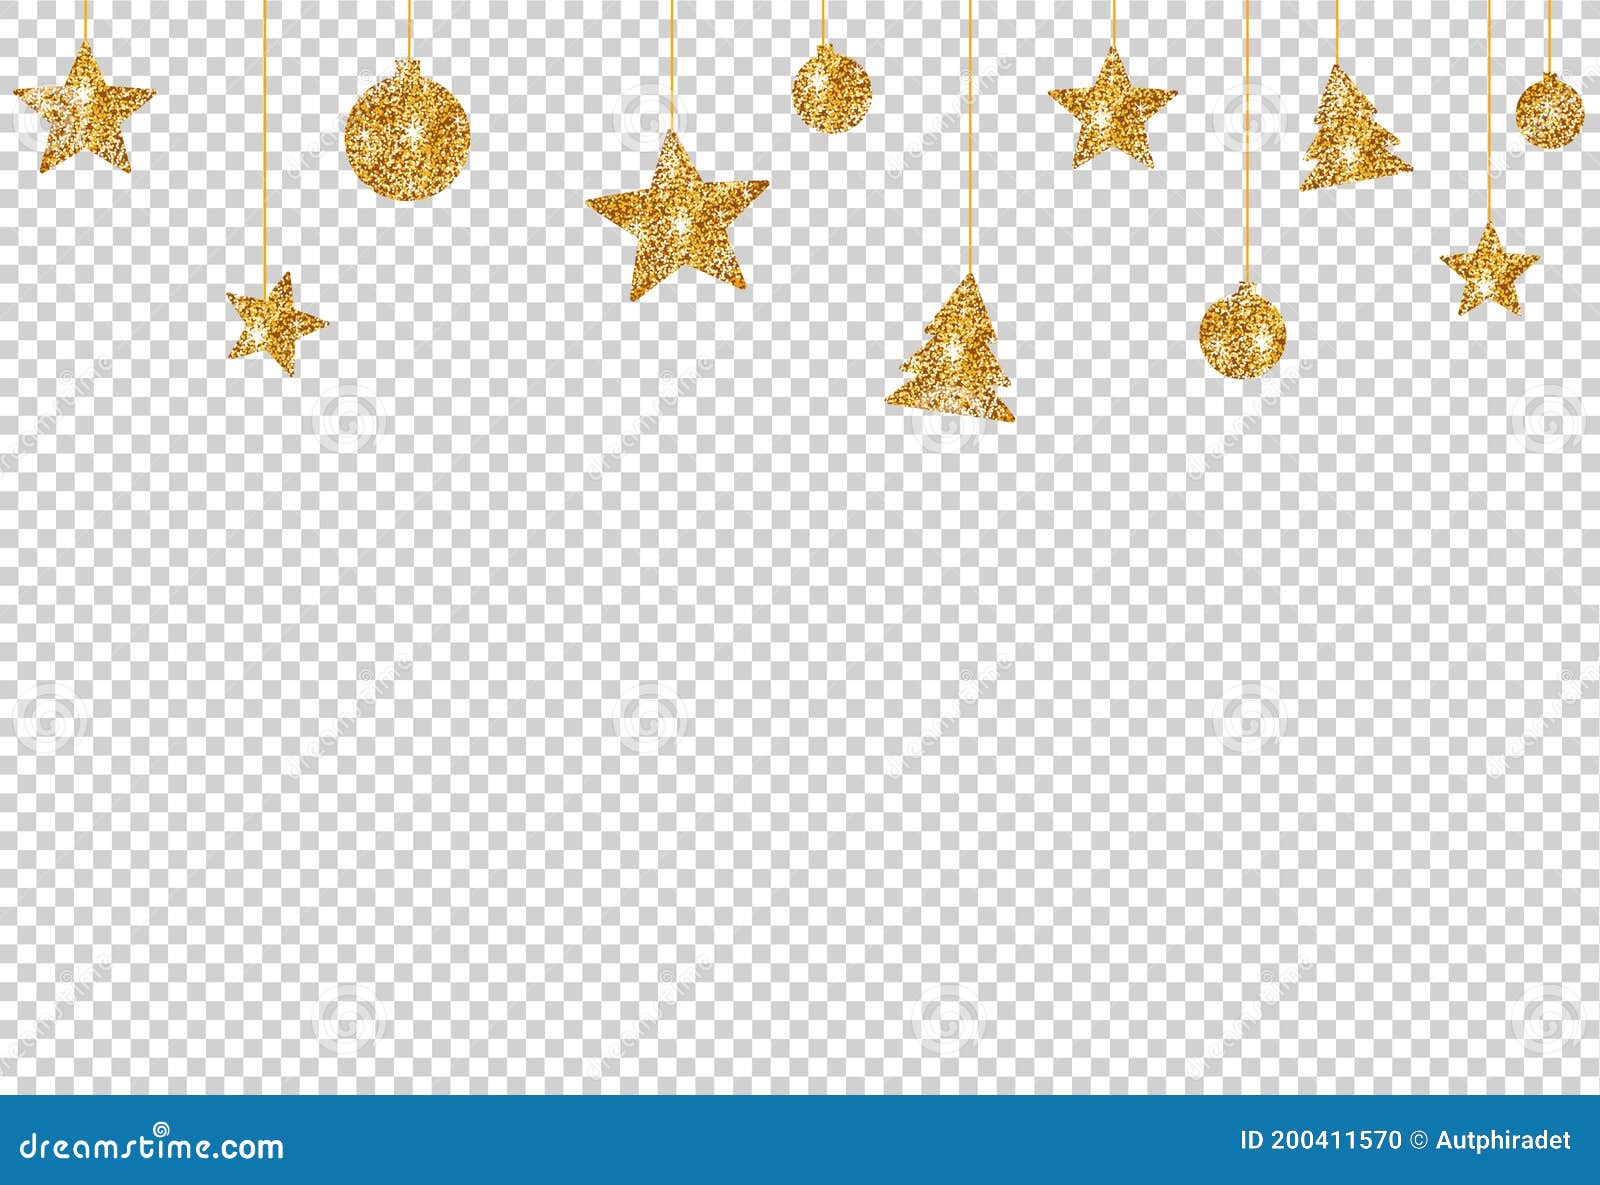 Christmas Glitter Golden Decoration, Star, Ball, Tree Hanging from Top  Isolated on Png or Transparent Background, Space for Text Stock Vector -  Illustration of ball, glow: 200411570